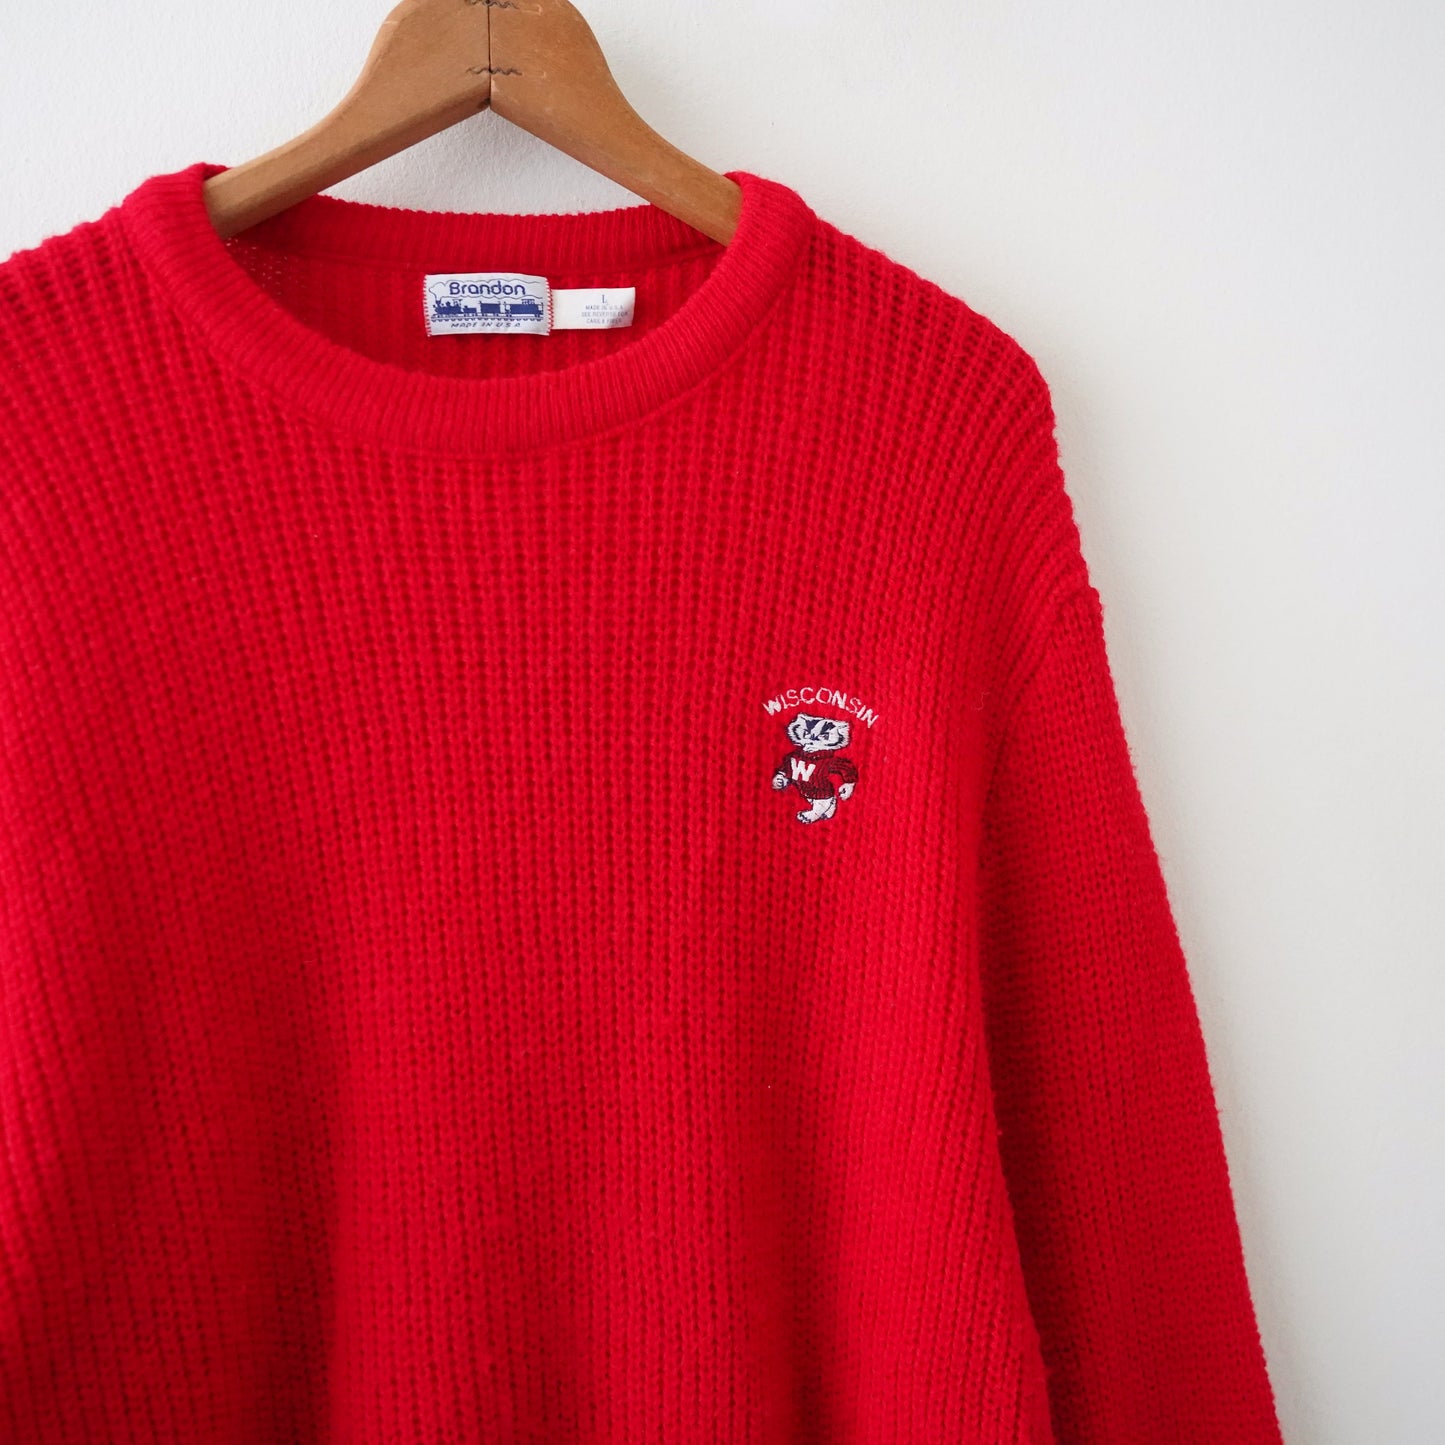 Wisconsin Badgers football knit sweater